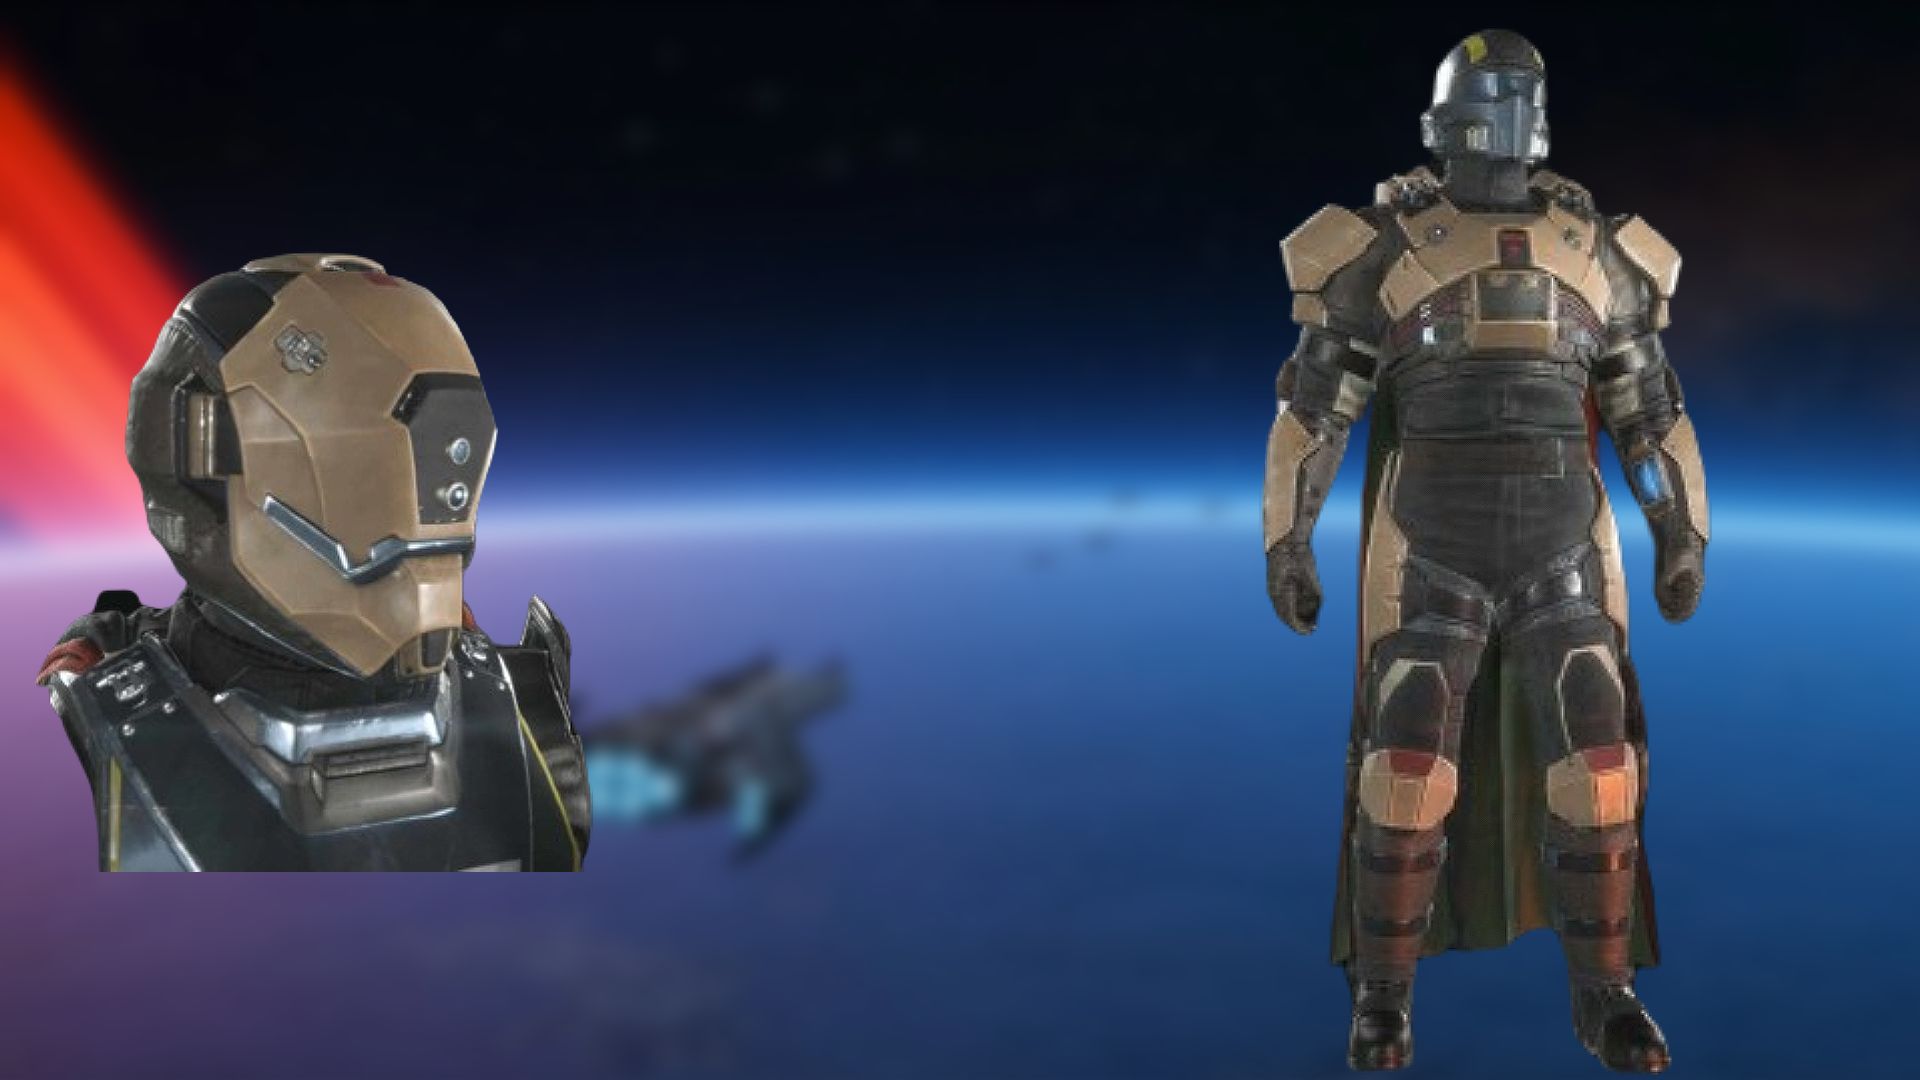 The EX-03 Prototype 3 armor set in Helldivers 2